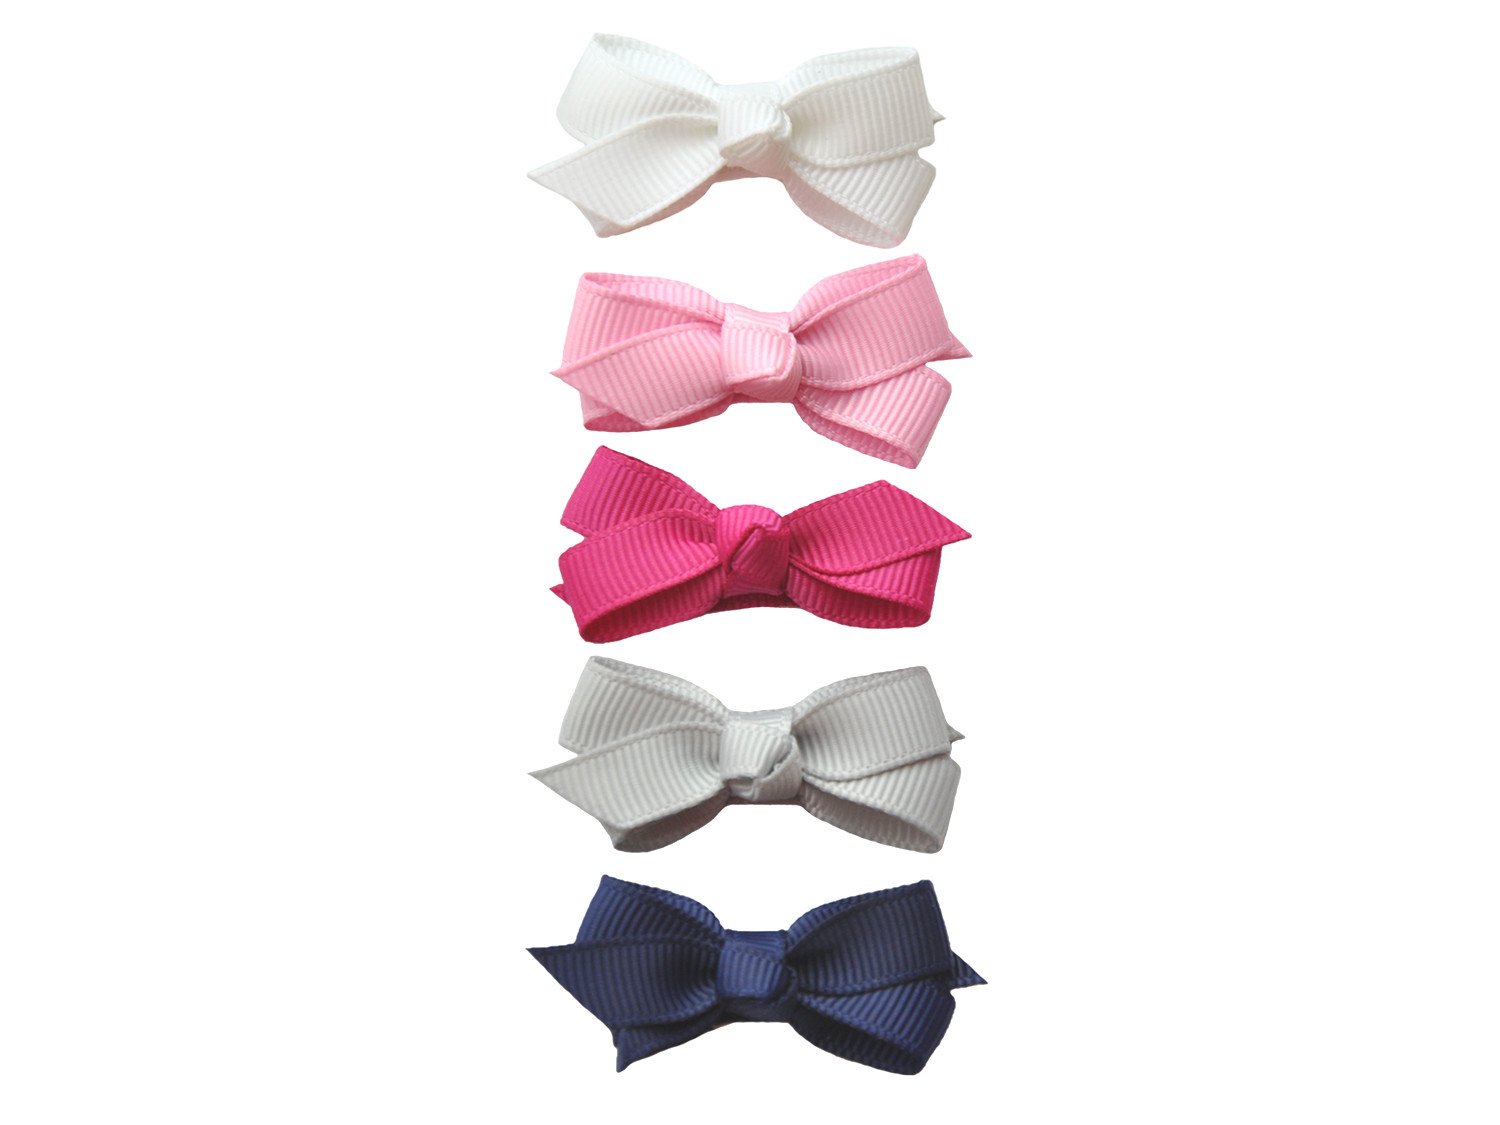 5 Small Snap Clips Chelsea Boutique Bow Collection - Prep Girl Baby Wisp